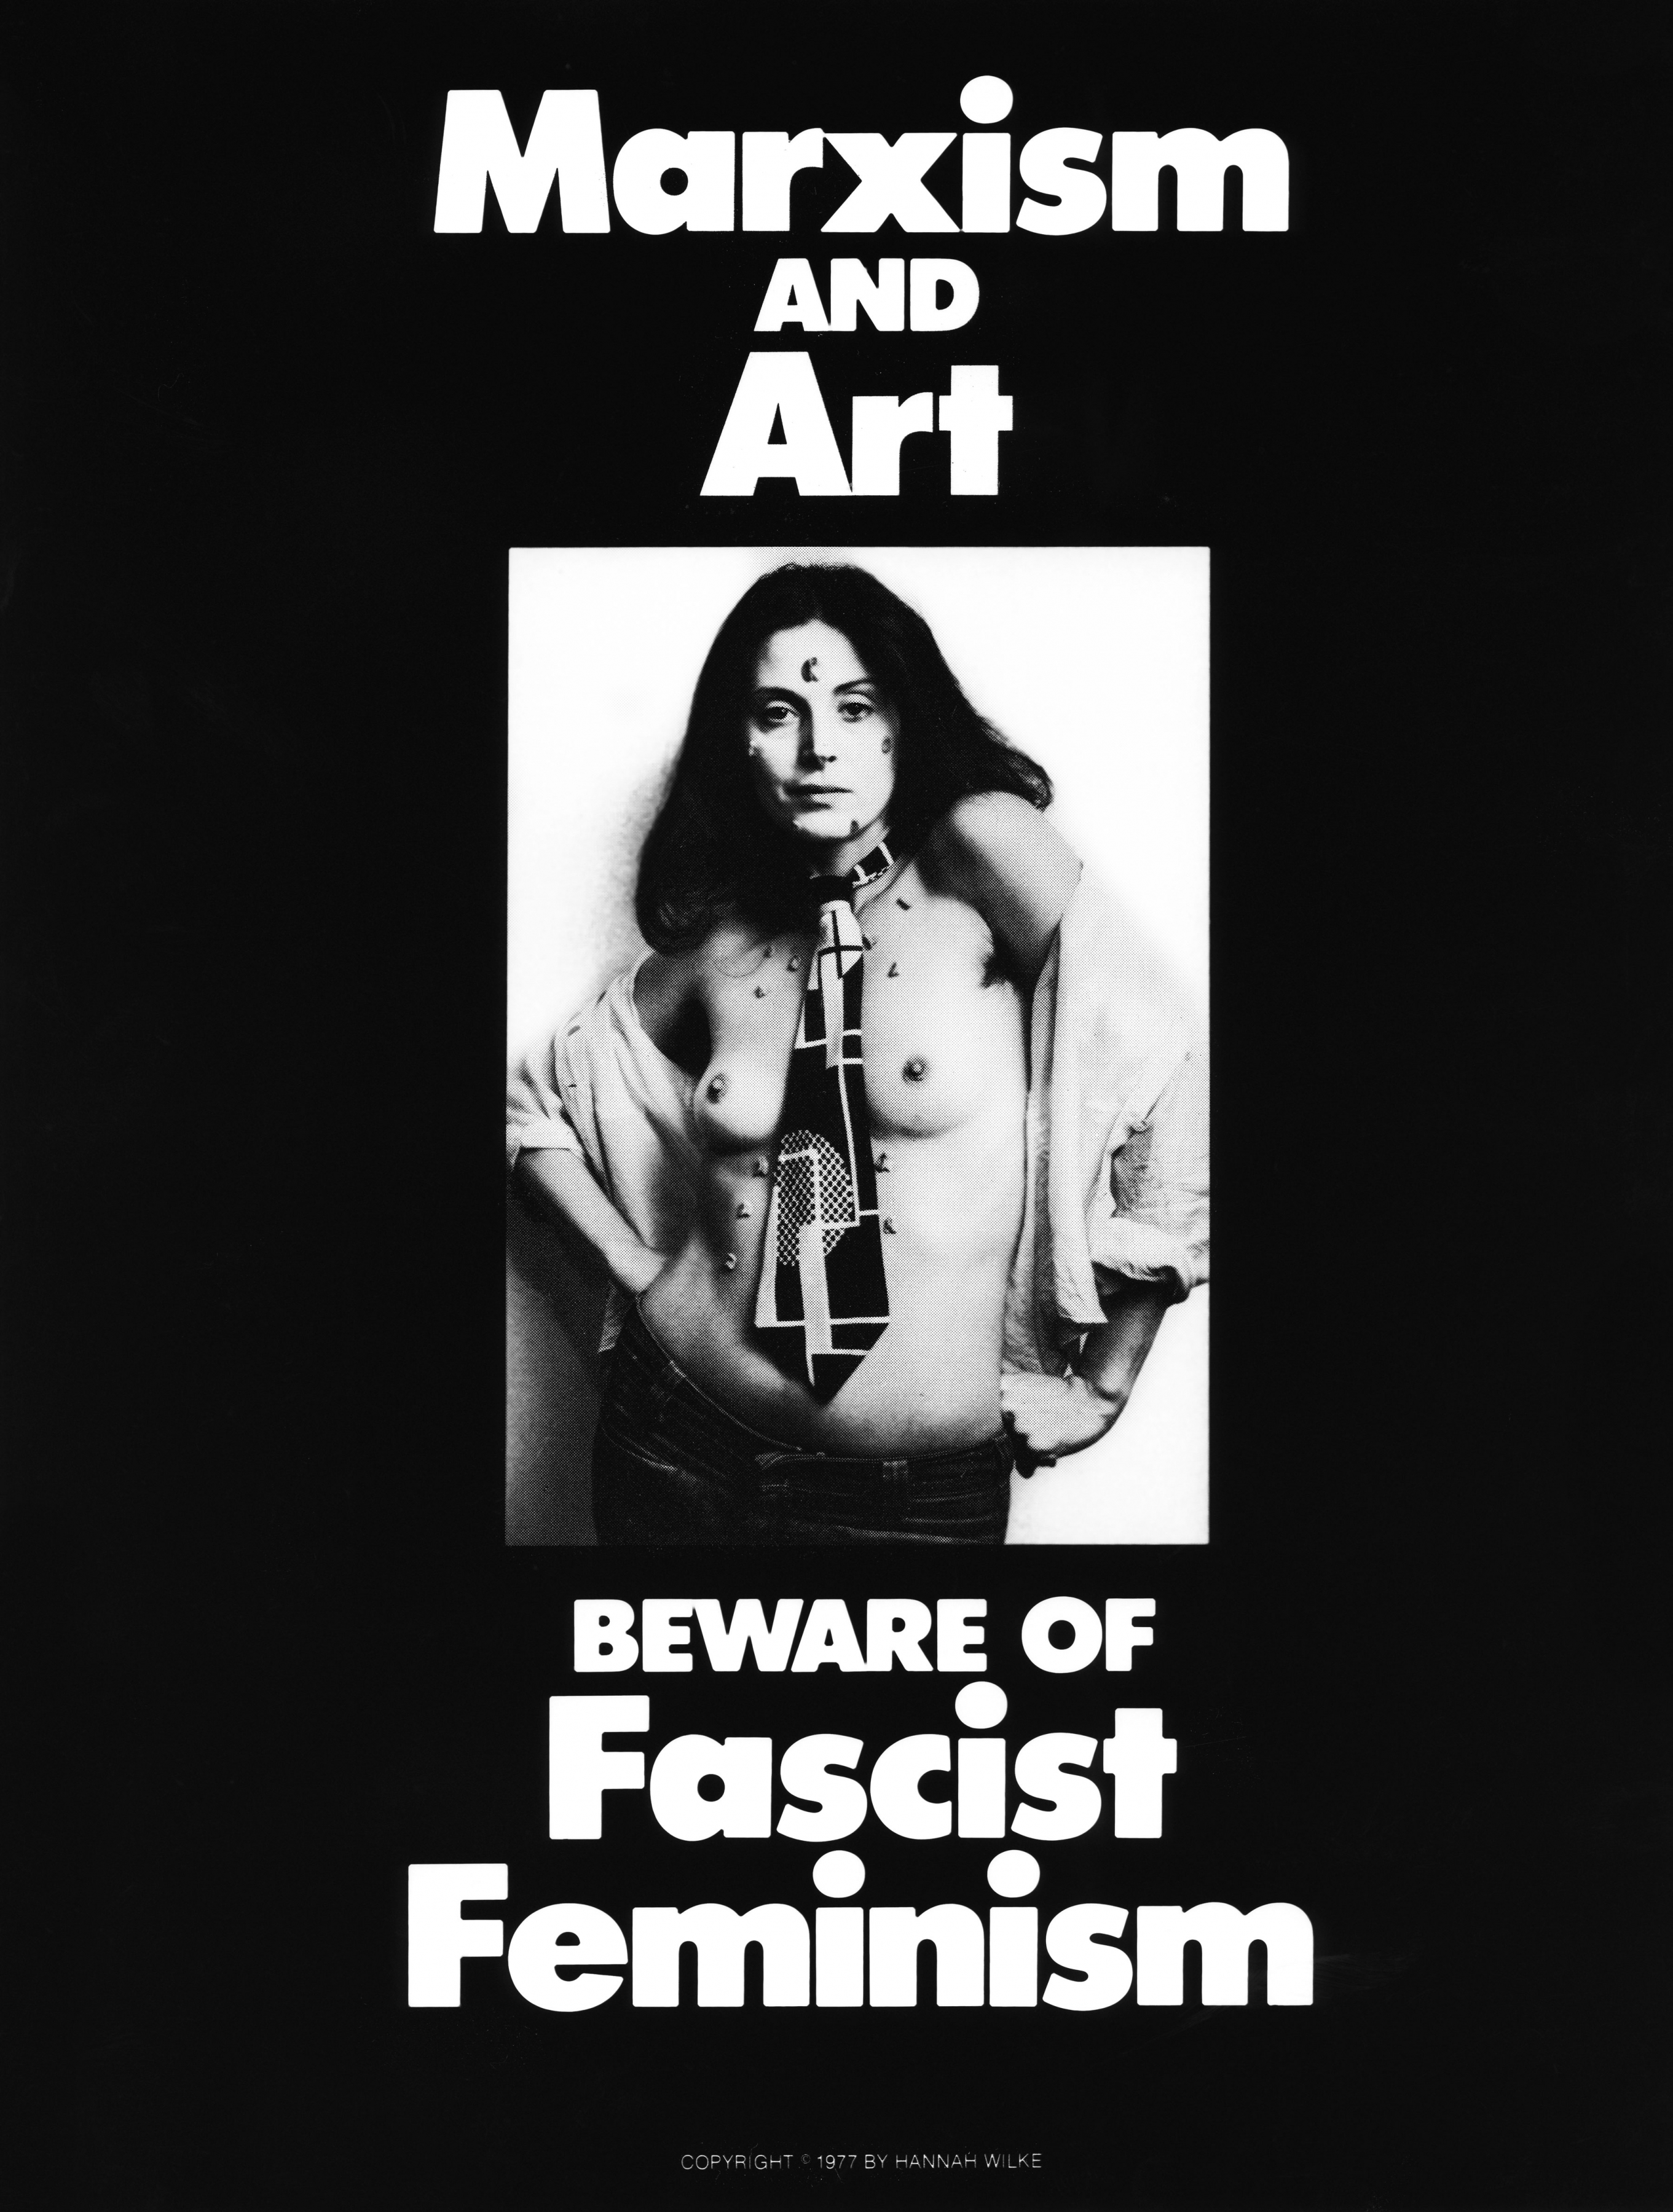 Hannah Wilke
Marxism and Art: Beware of Fascist Feminism, 1977
Silkscreen on plexiglass
35 7/16 &amp;times; 27 3/8 inches (90 &amp;times; 69.5 cm)
The Museum of Modern Art, New York; General Print Fund, Riva Castleman Endowment Fund, Harvey S. Shipley Miller Fund, The Contemporary Arts Council of The Museum of Modern Art, and partial gift of Marsie, Emanuelle, Damon, and Andrew Scharlatt, Hannah Wilke Collection and Archive, Los Angeles.